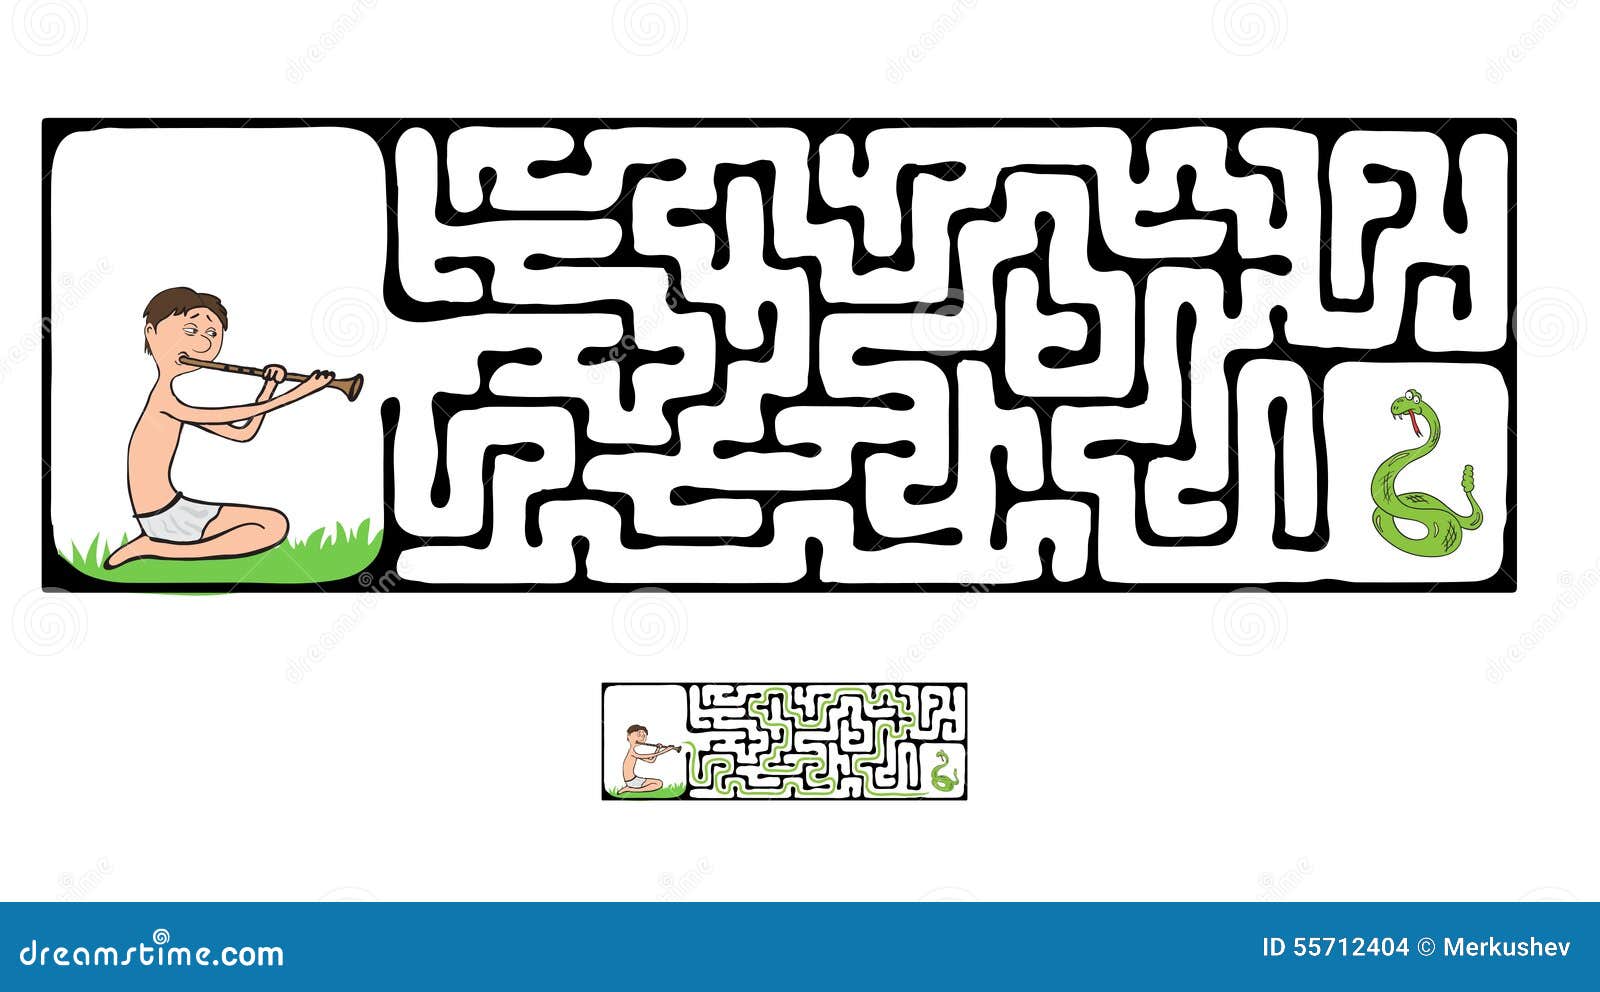  maze, labyrinth with snake and fakir